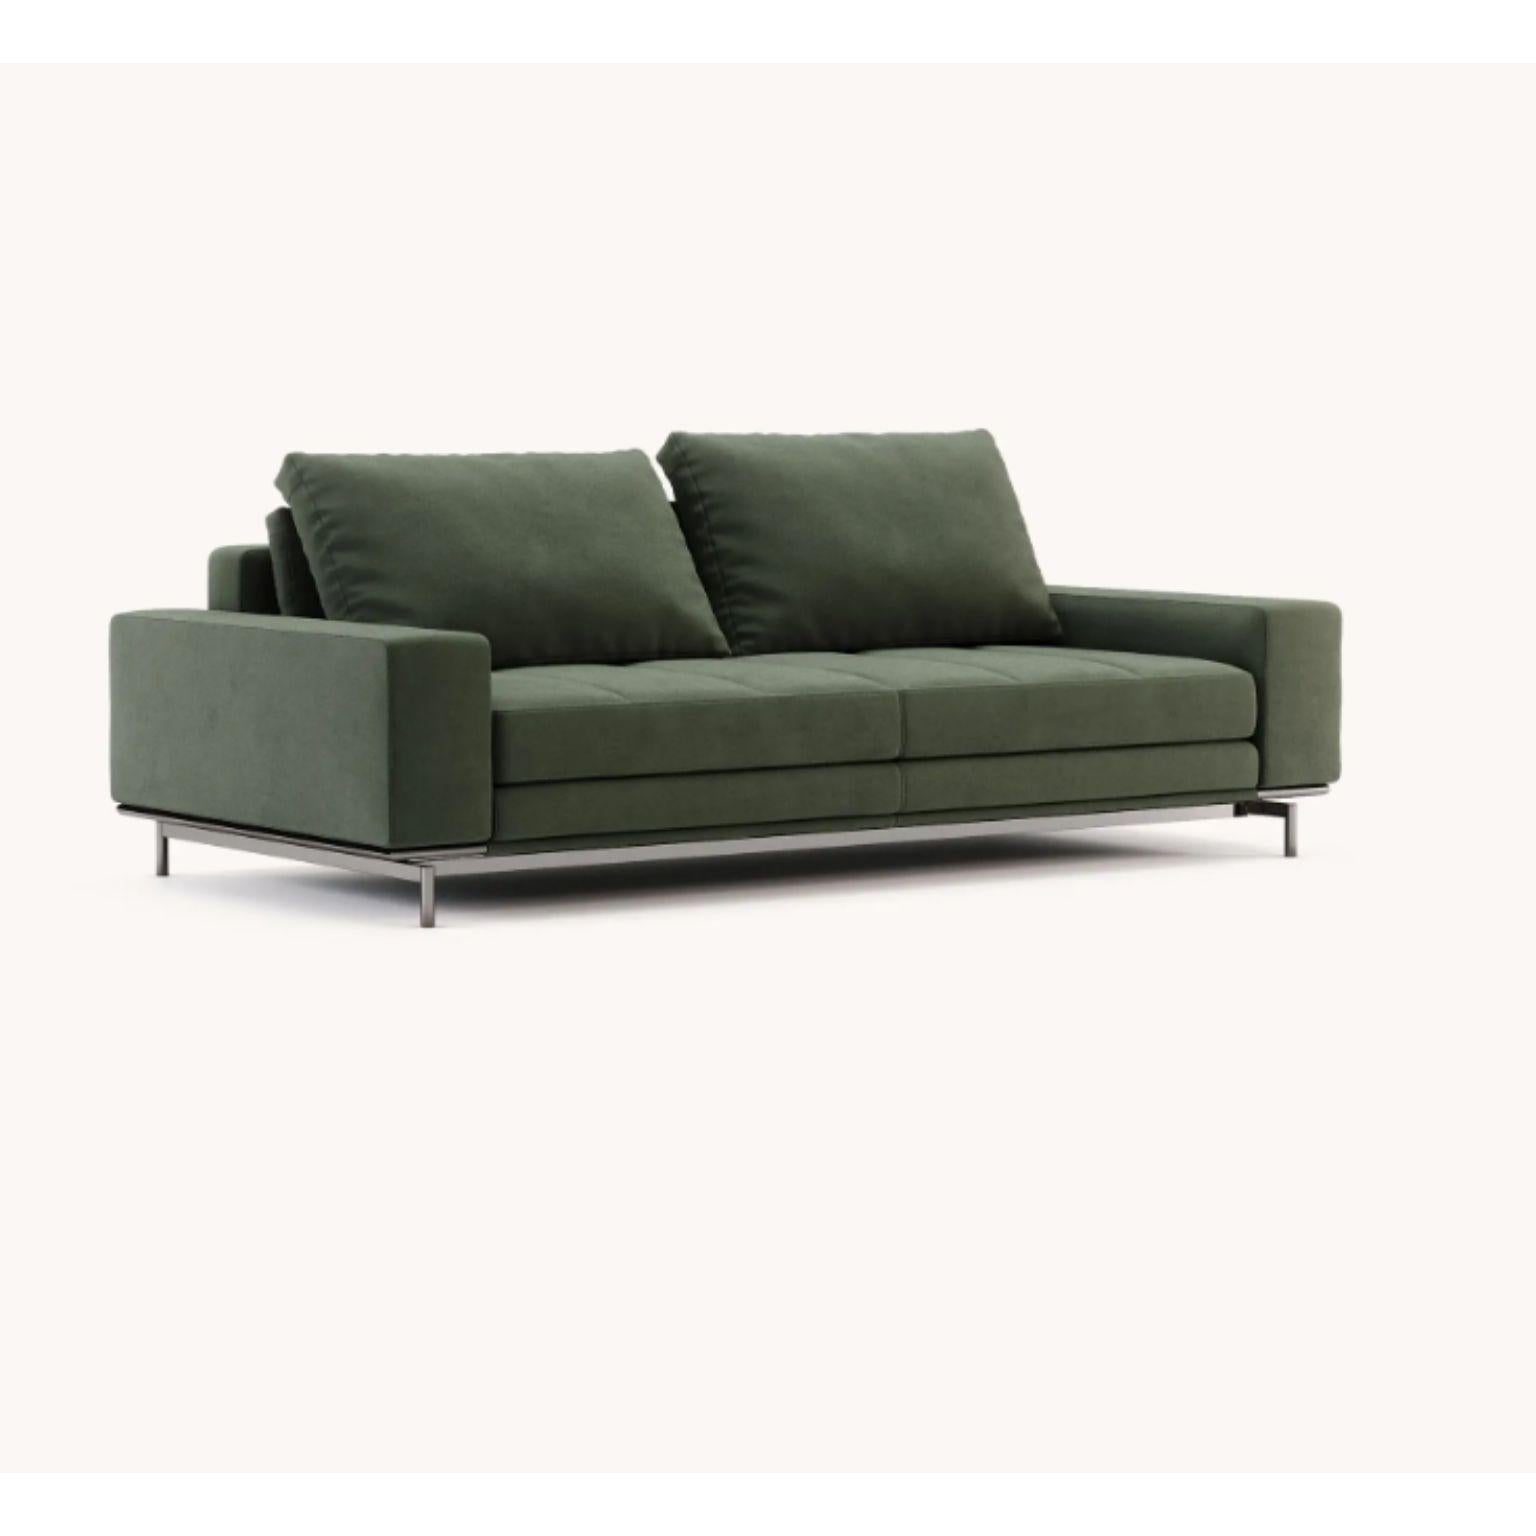 Parker 2 Seats Sofa by Domkapa
Materials: Polished stainless steel, velvet (Alban 2940). 
Dimensions: W 230 x D 110 x H 88 cm.
Also available in different materials. Please contact us.

The most recent addition to Domkapa’s sofa collection,